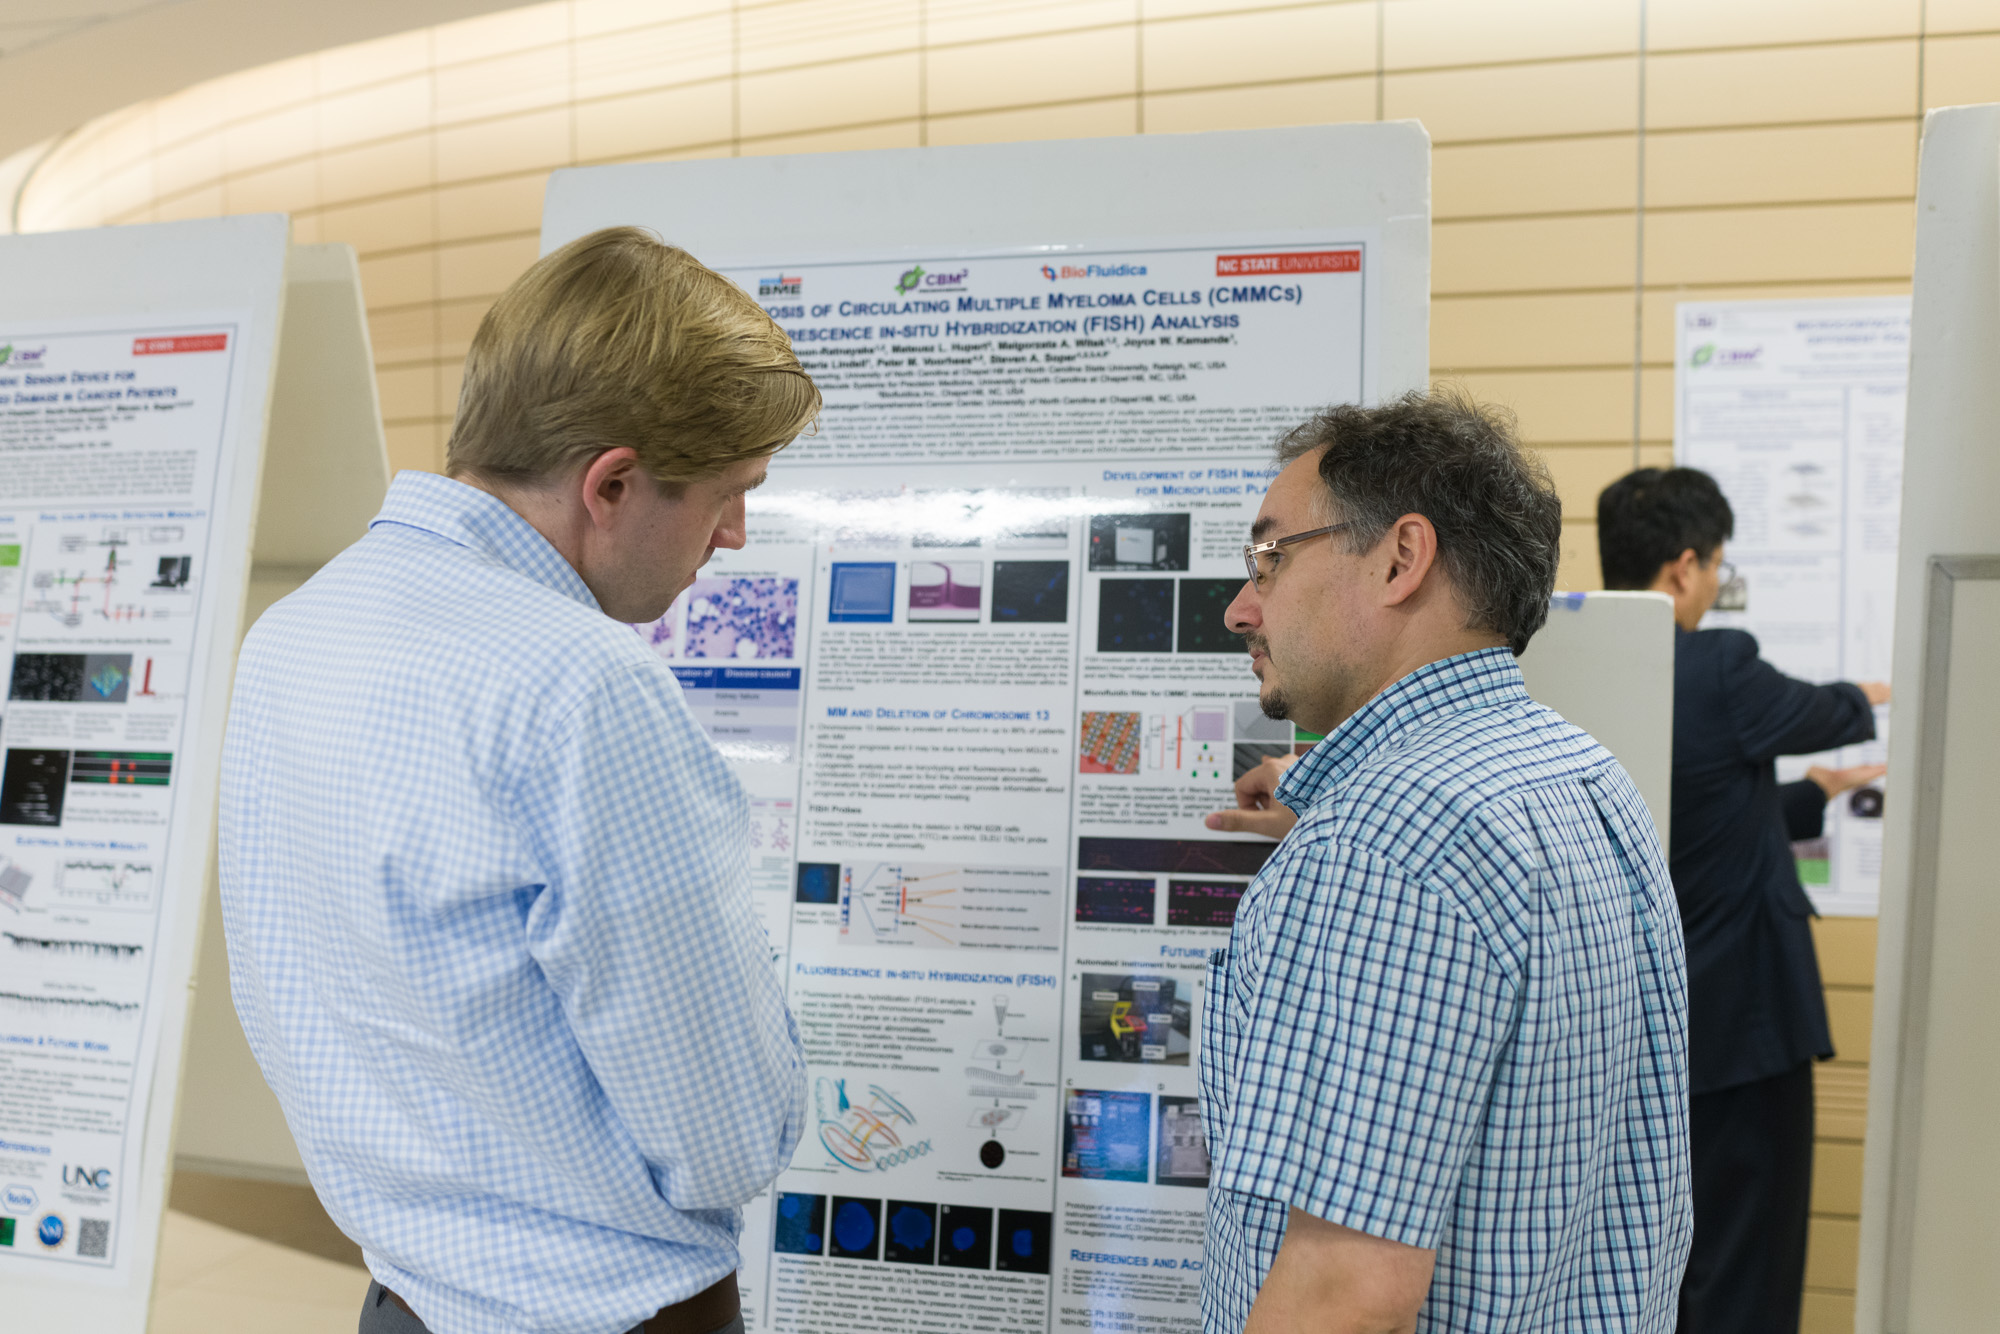 Two men discussing a scientific poster about 'Circulating Multiple Myeloma Cells' and 'FISH Analysis', with other posters in the background.